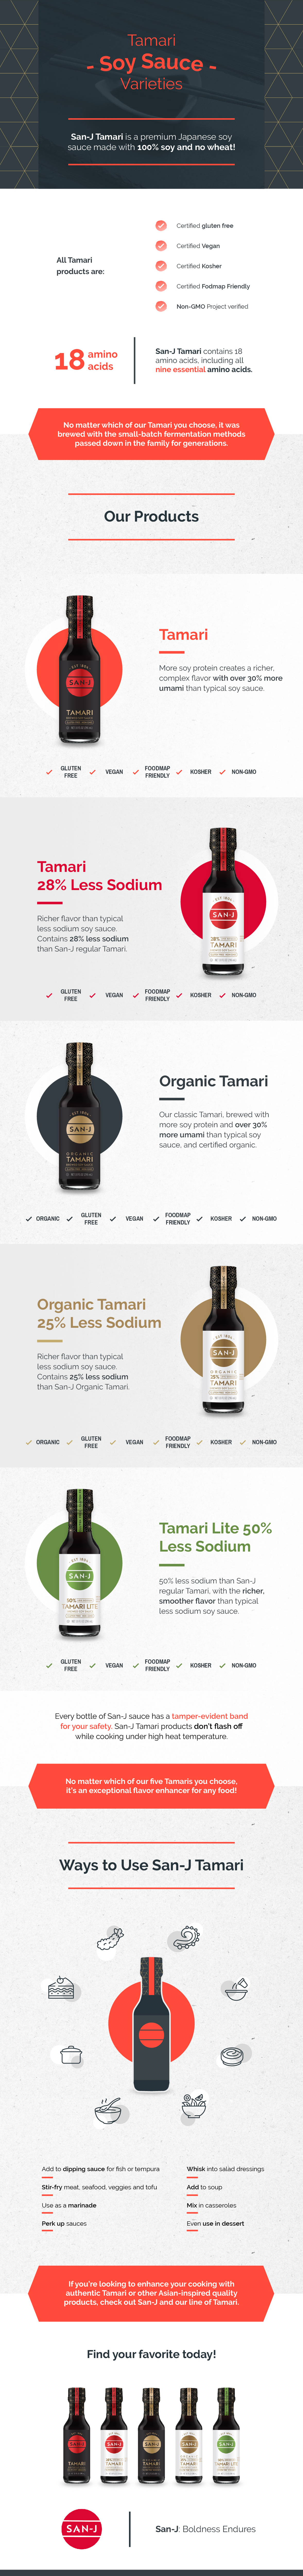 Infographic of Different Tamari Soy Sauce Varieties by San-J